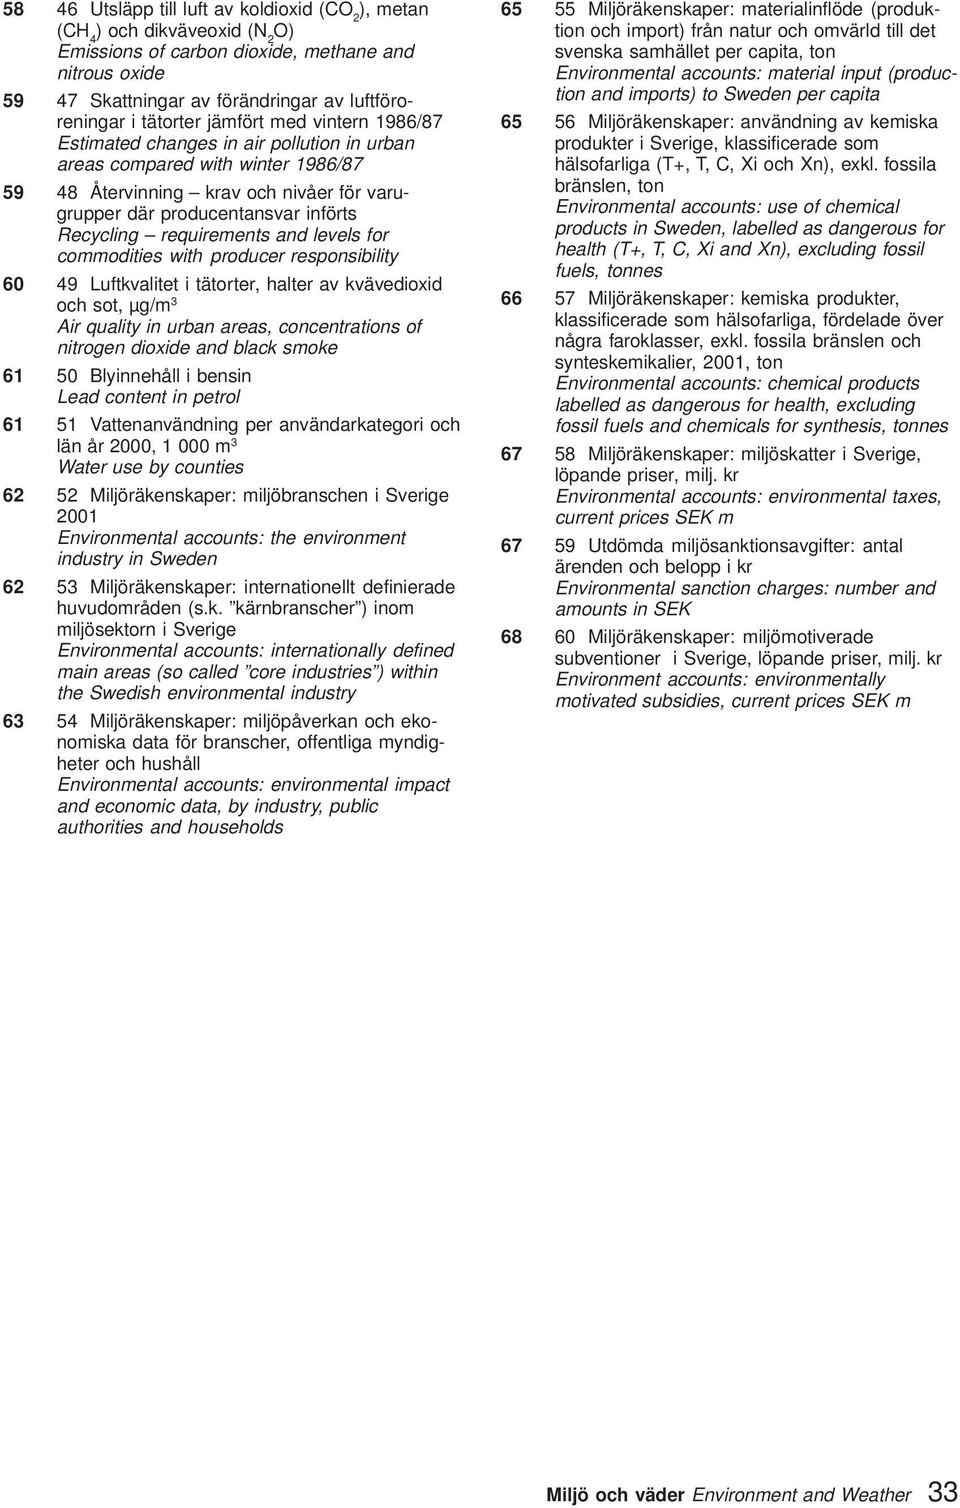 requirements and levels for commodities with producer responsibility 60 49 Luftkvalitet i tätorter, halter av kvävedioxid och sot, µg/m 3 Air quality in urban areas, concentrations of nitrogen